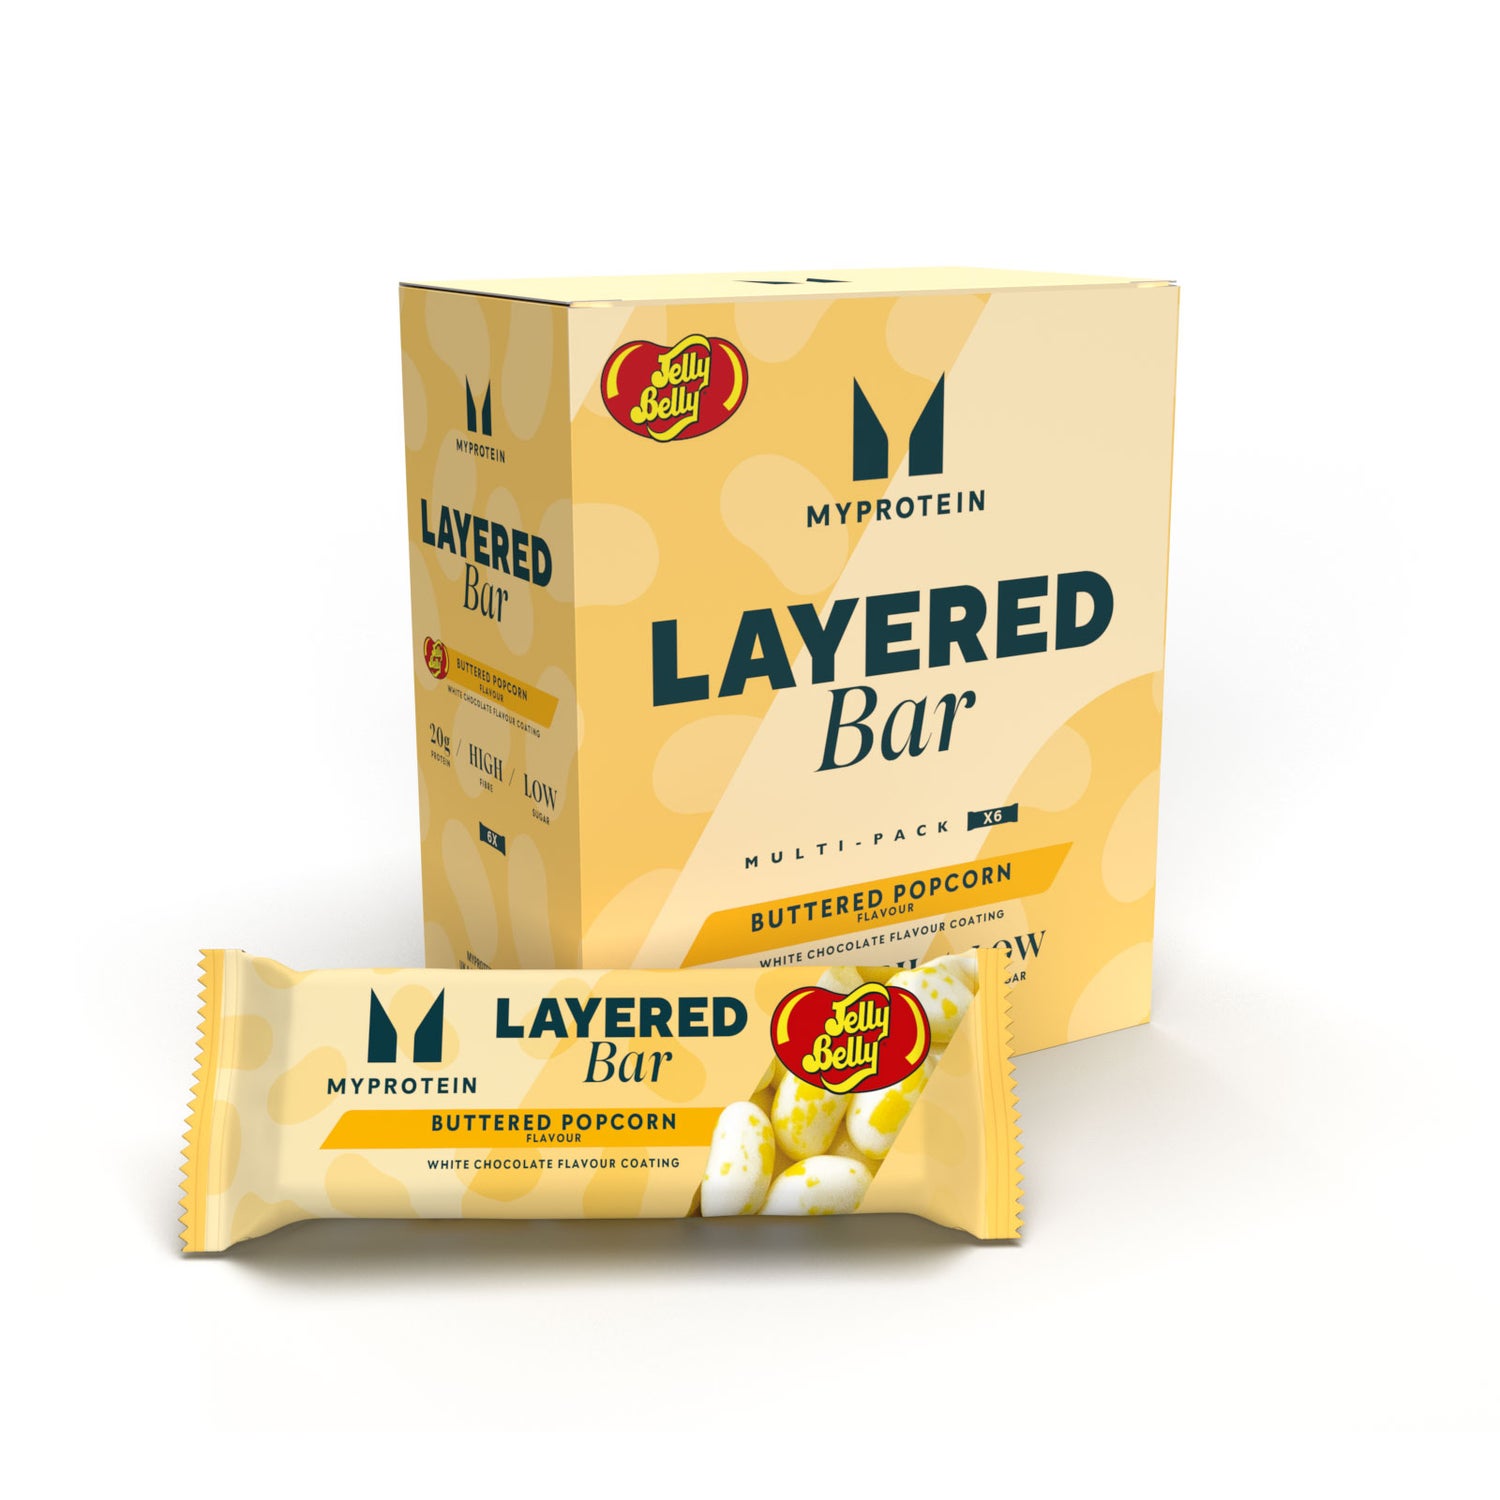 Layered Protein Bar - 6 x 60g - Buttered Popcorn